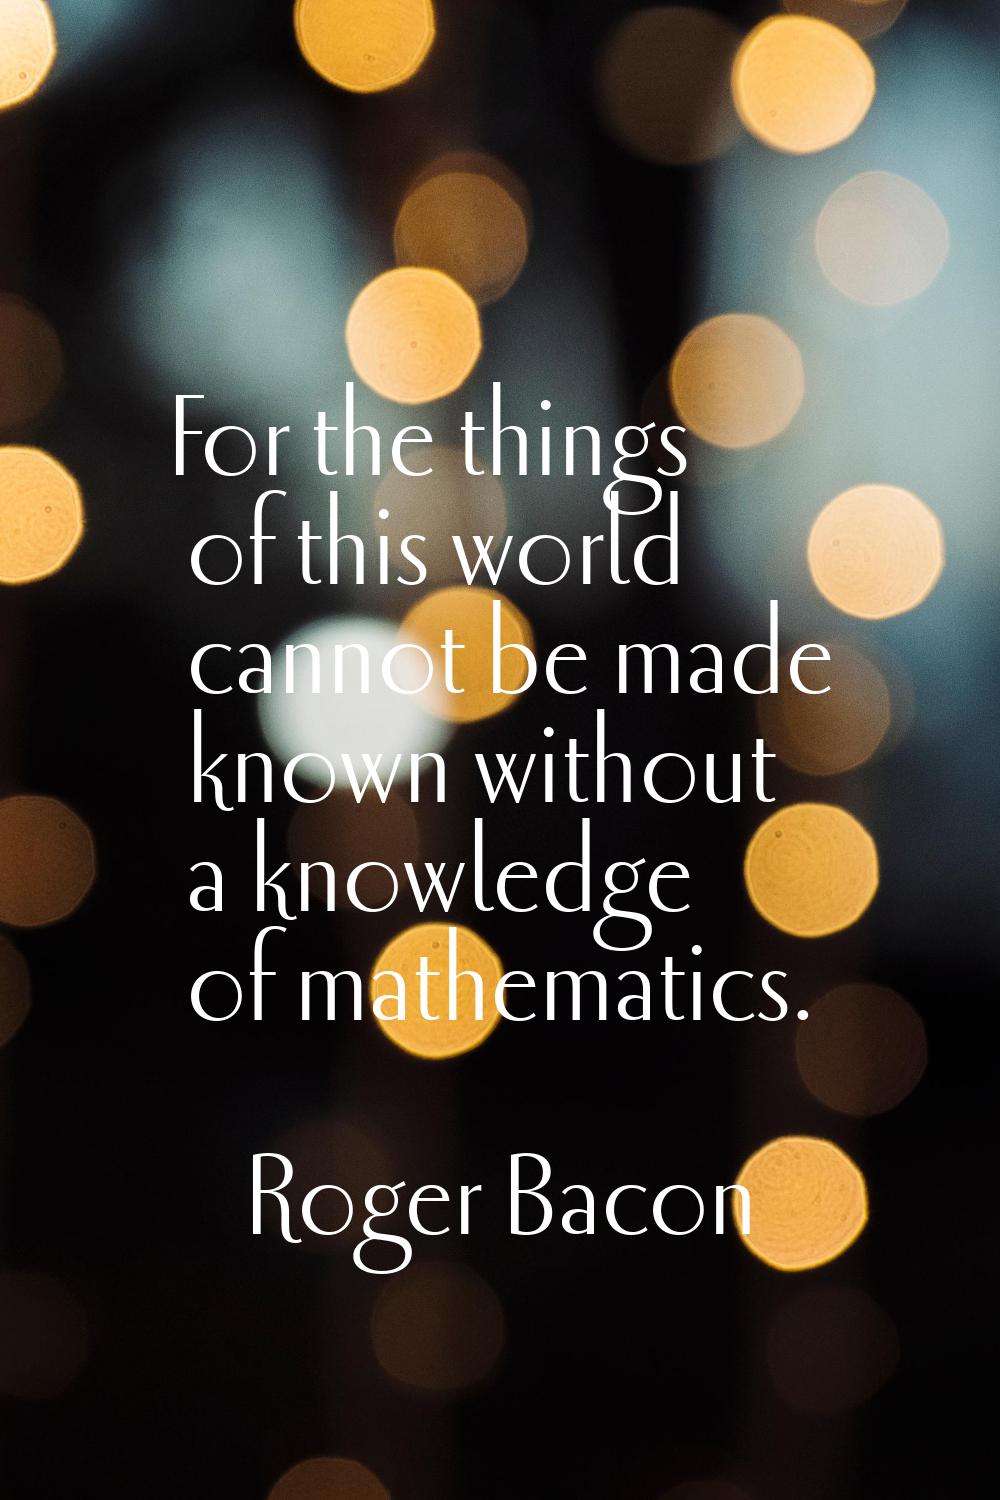 For the things of this world cannot be made known without a knowledge of mathematics.